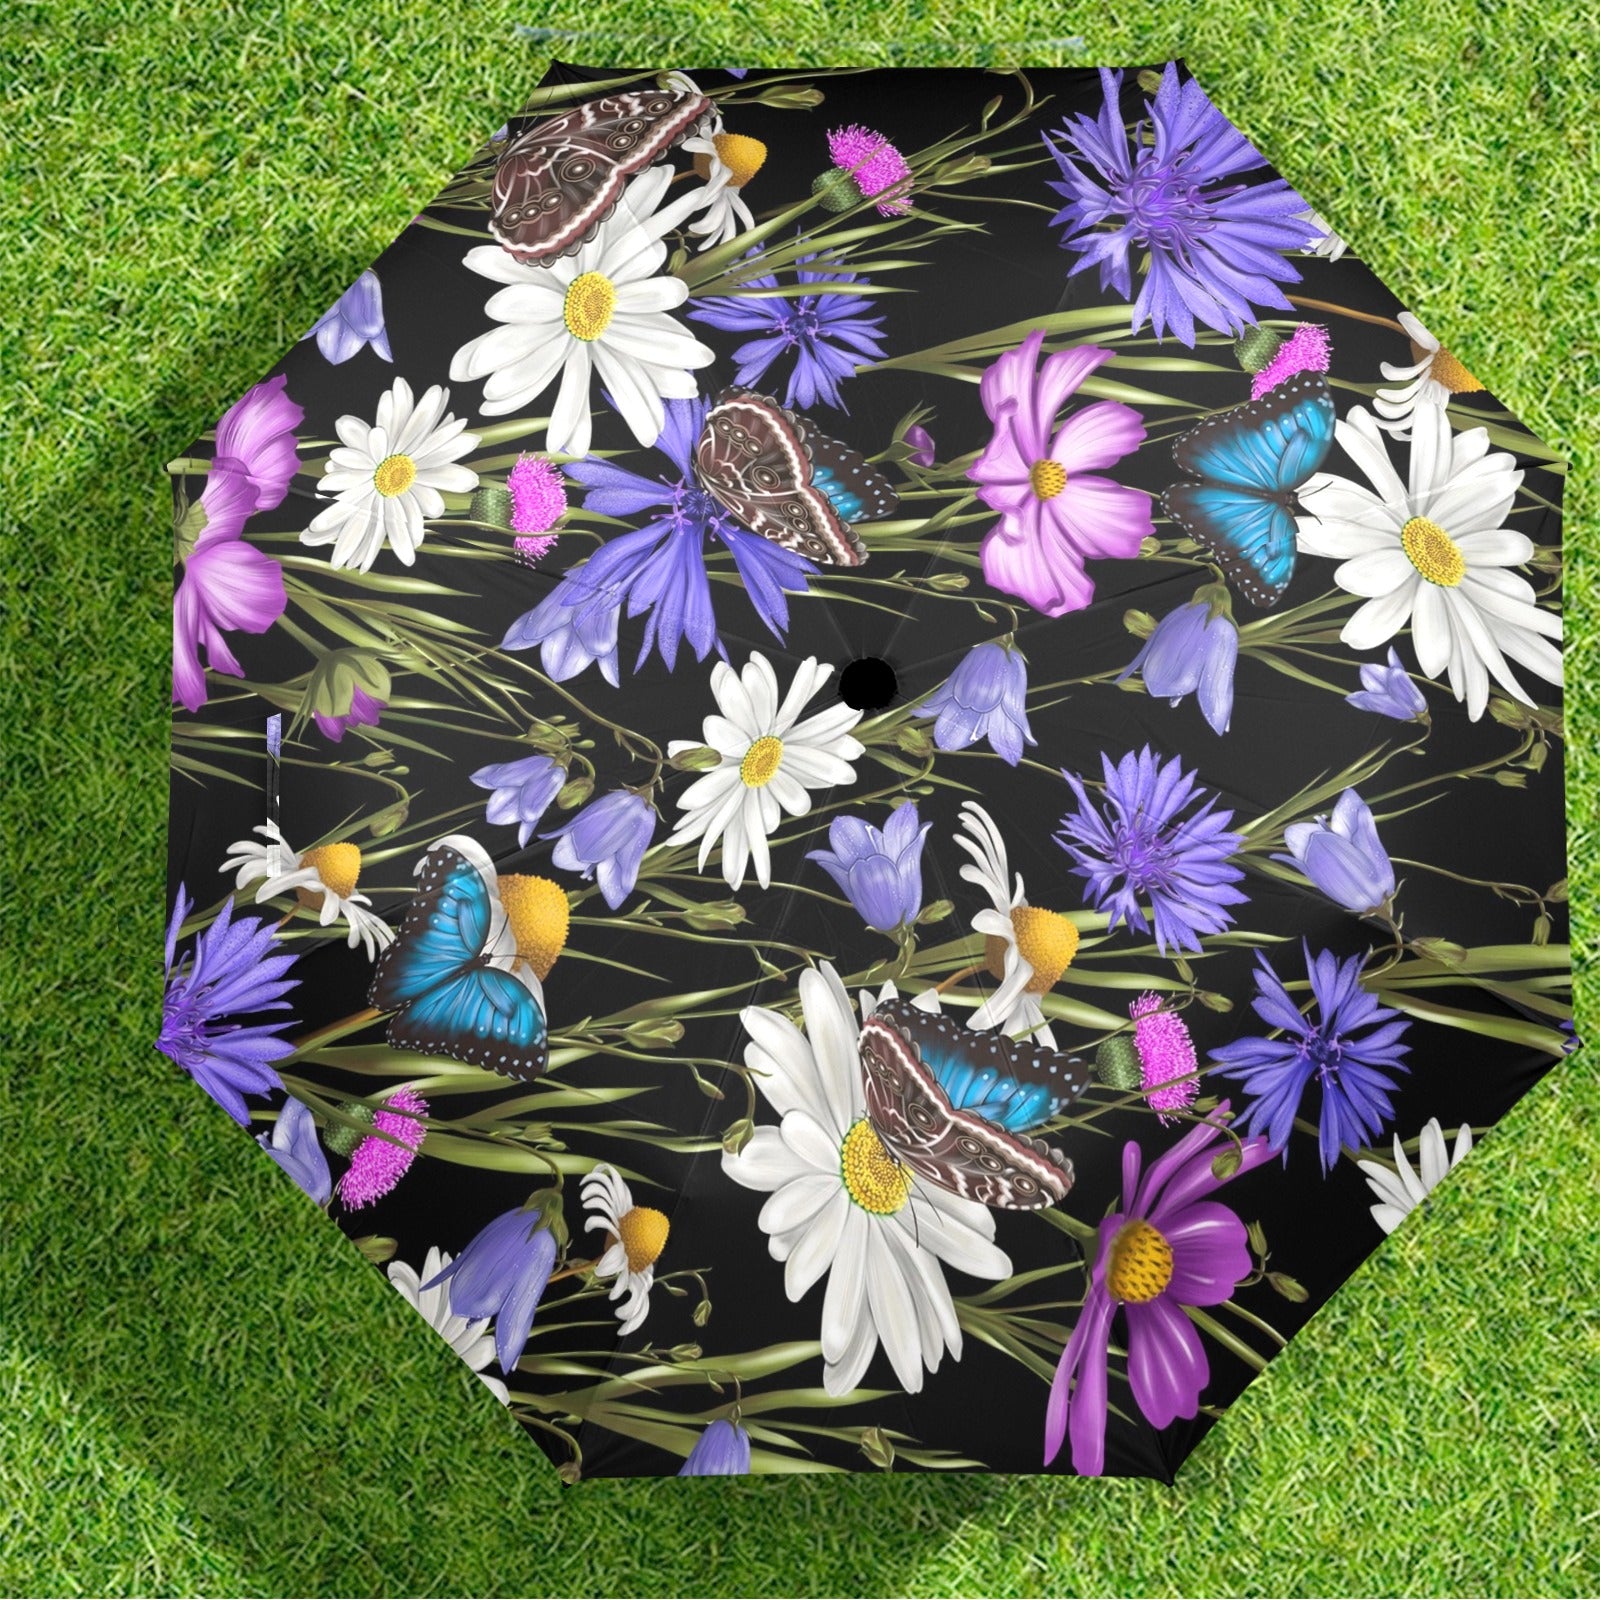 Butterfly Flowers - Semi-Automatic Foldable Umbrella Semi-Automatic Foldable Umbrella